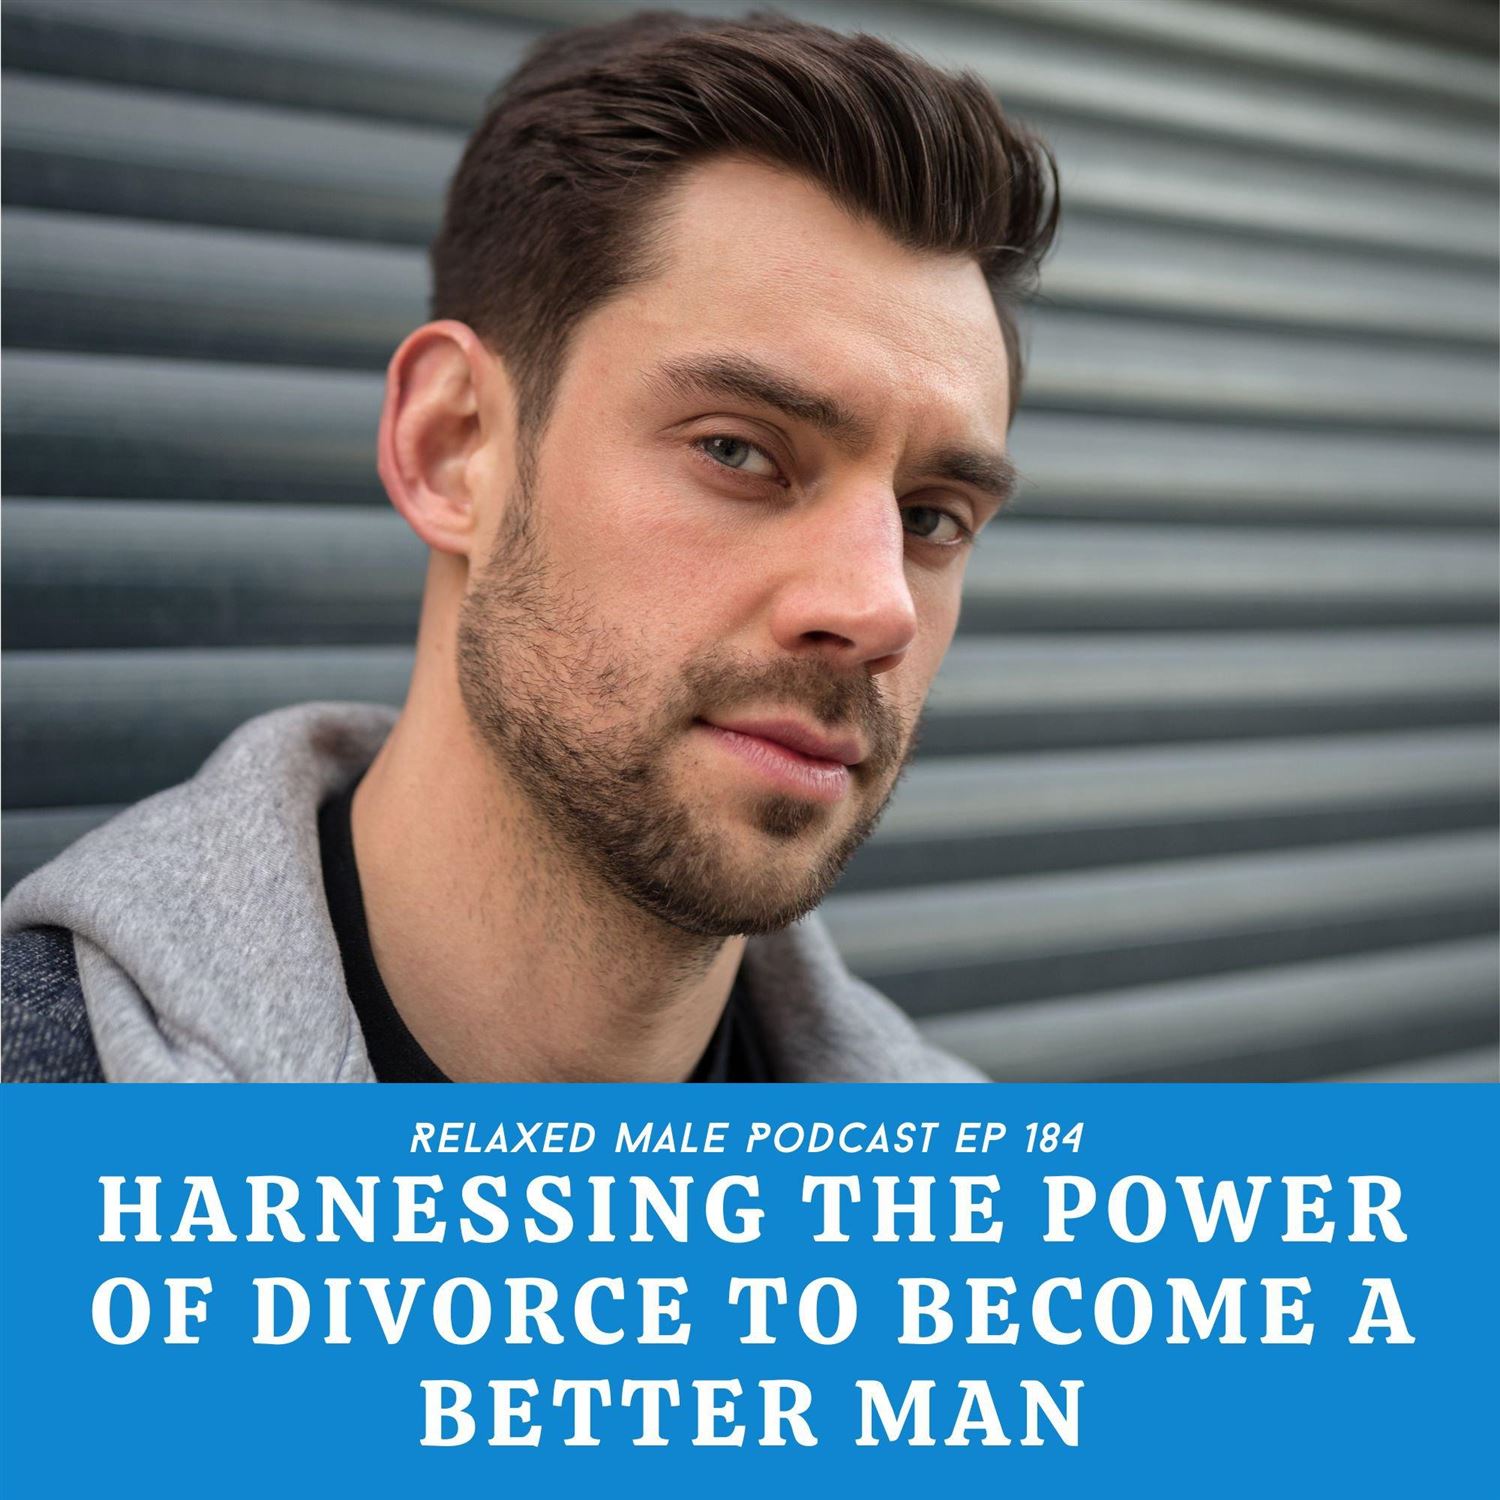 Harnessing the Power of Your Divorce to Become a Better Man